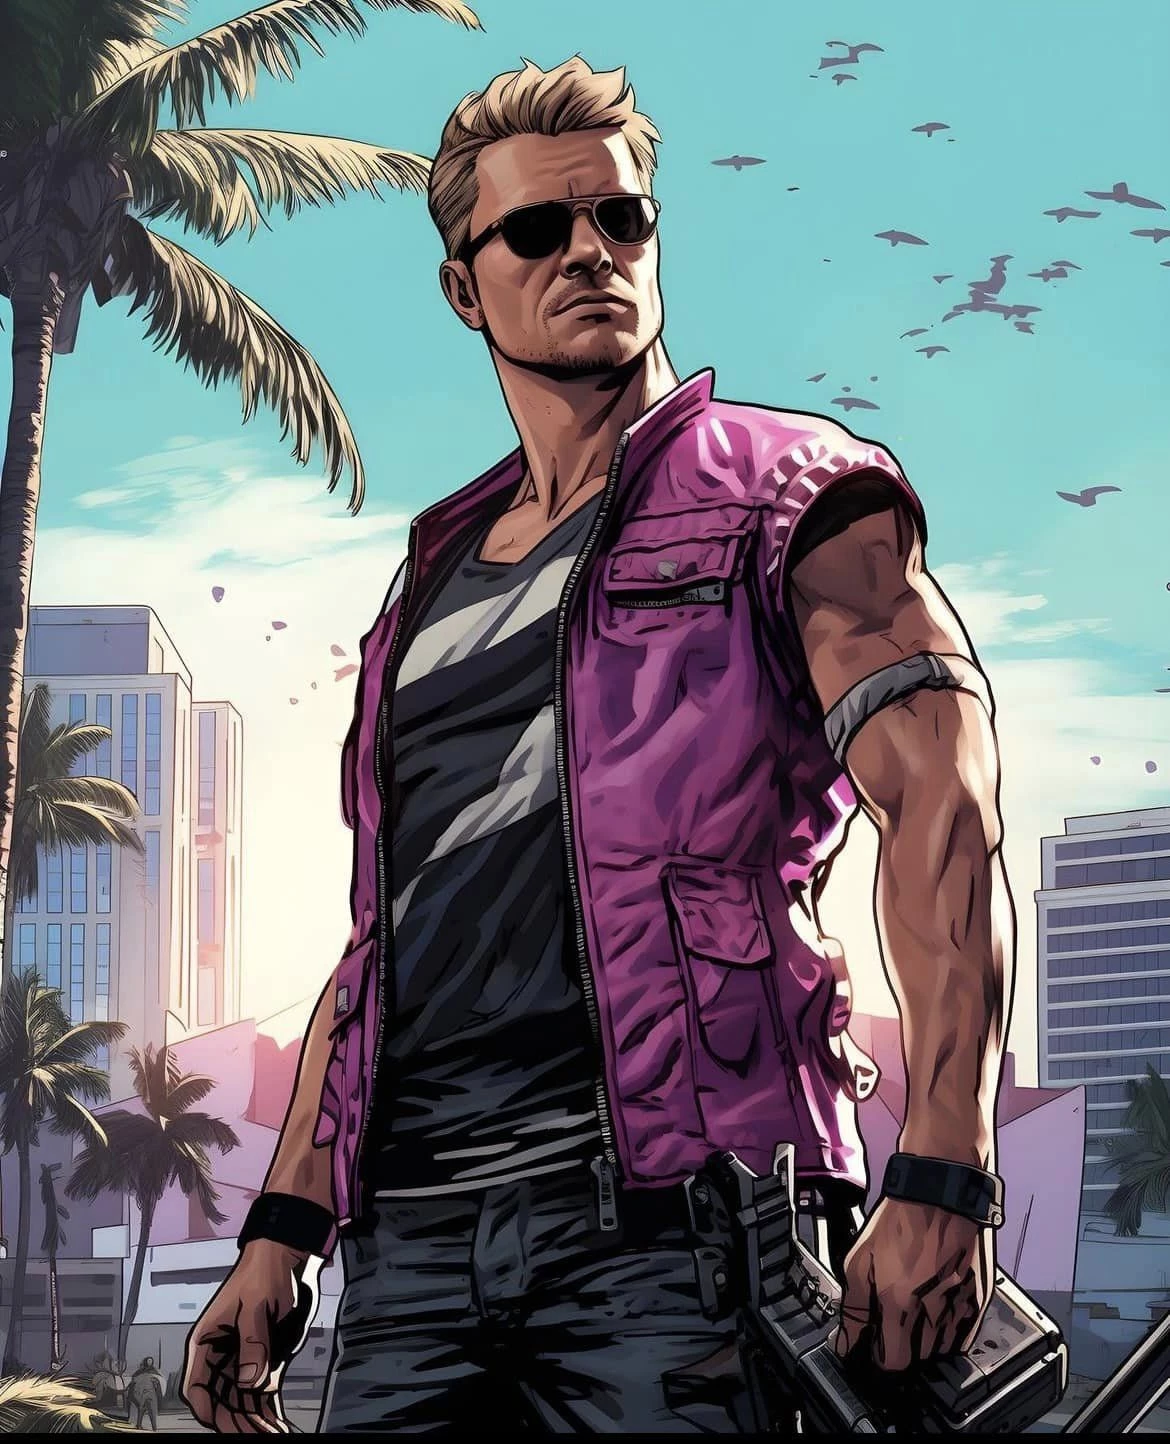 And Last But Not Least, Hawkeye, With A Badass Denim Jacket To Fit In The Atmosphere